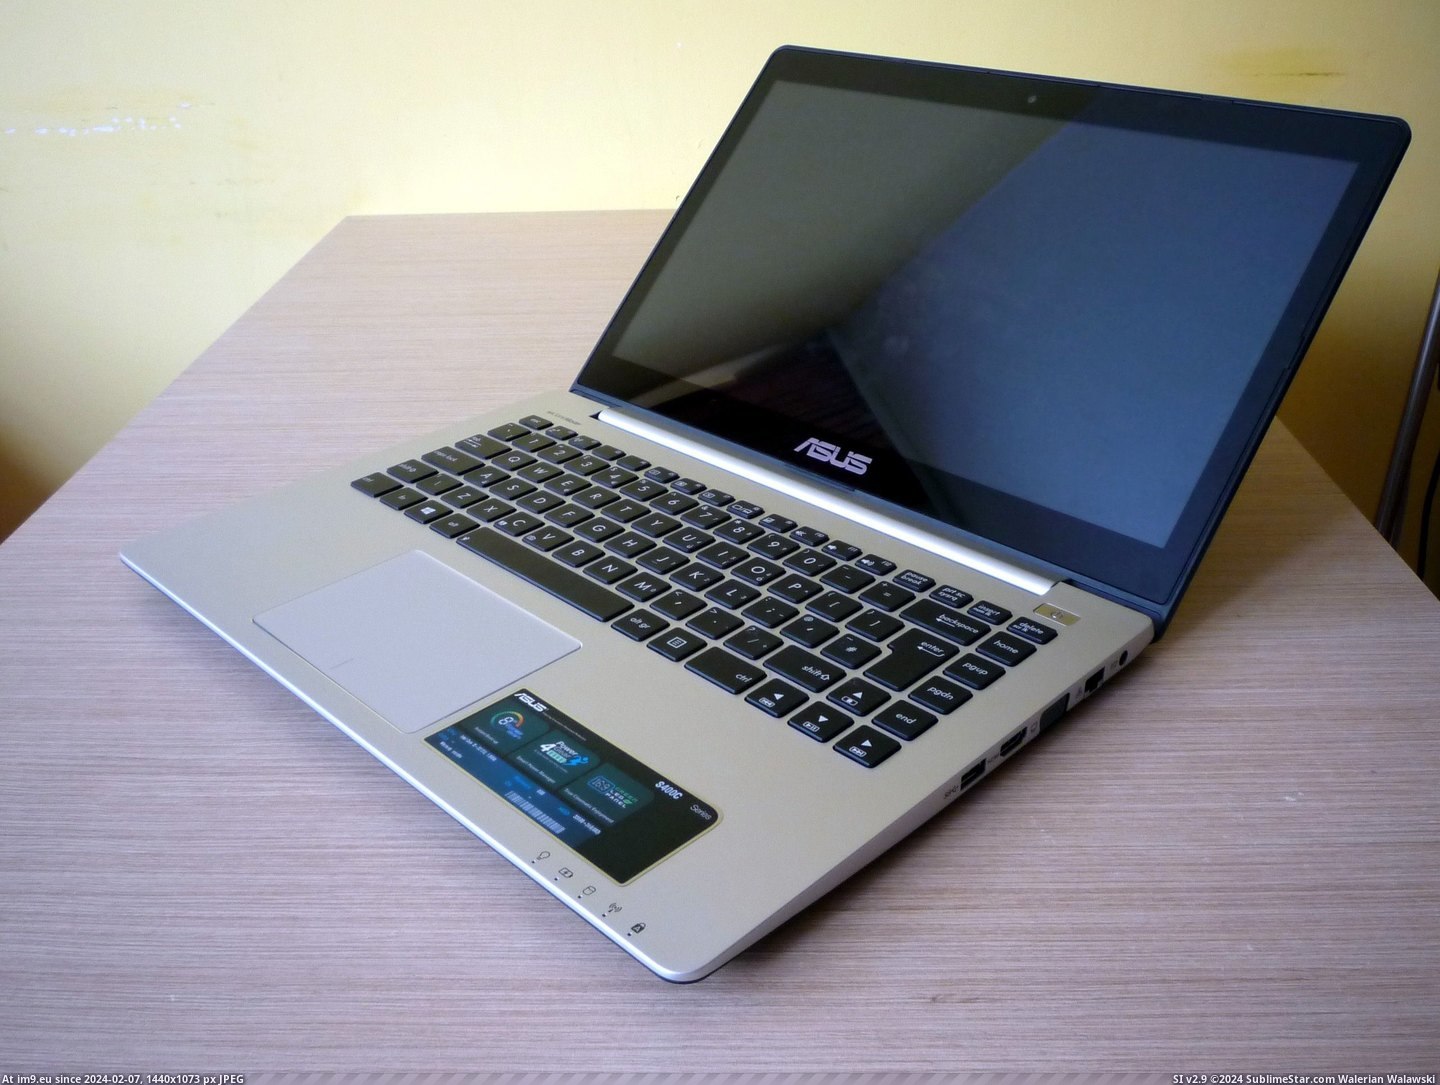 #Opened #S400 #Vivobook #Asus Asus VivoBook S400 - opened Pic. (Image of album Rehost))